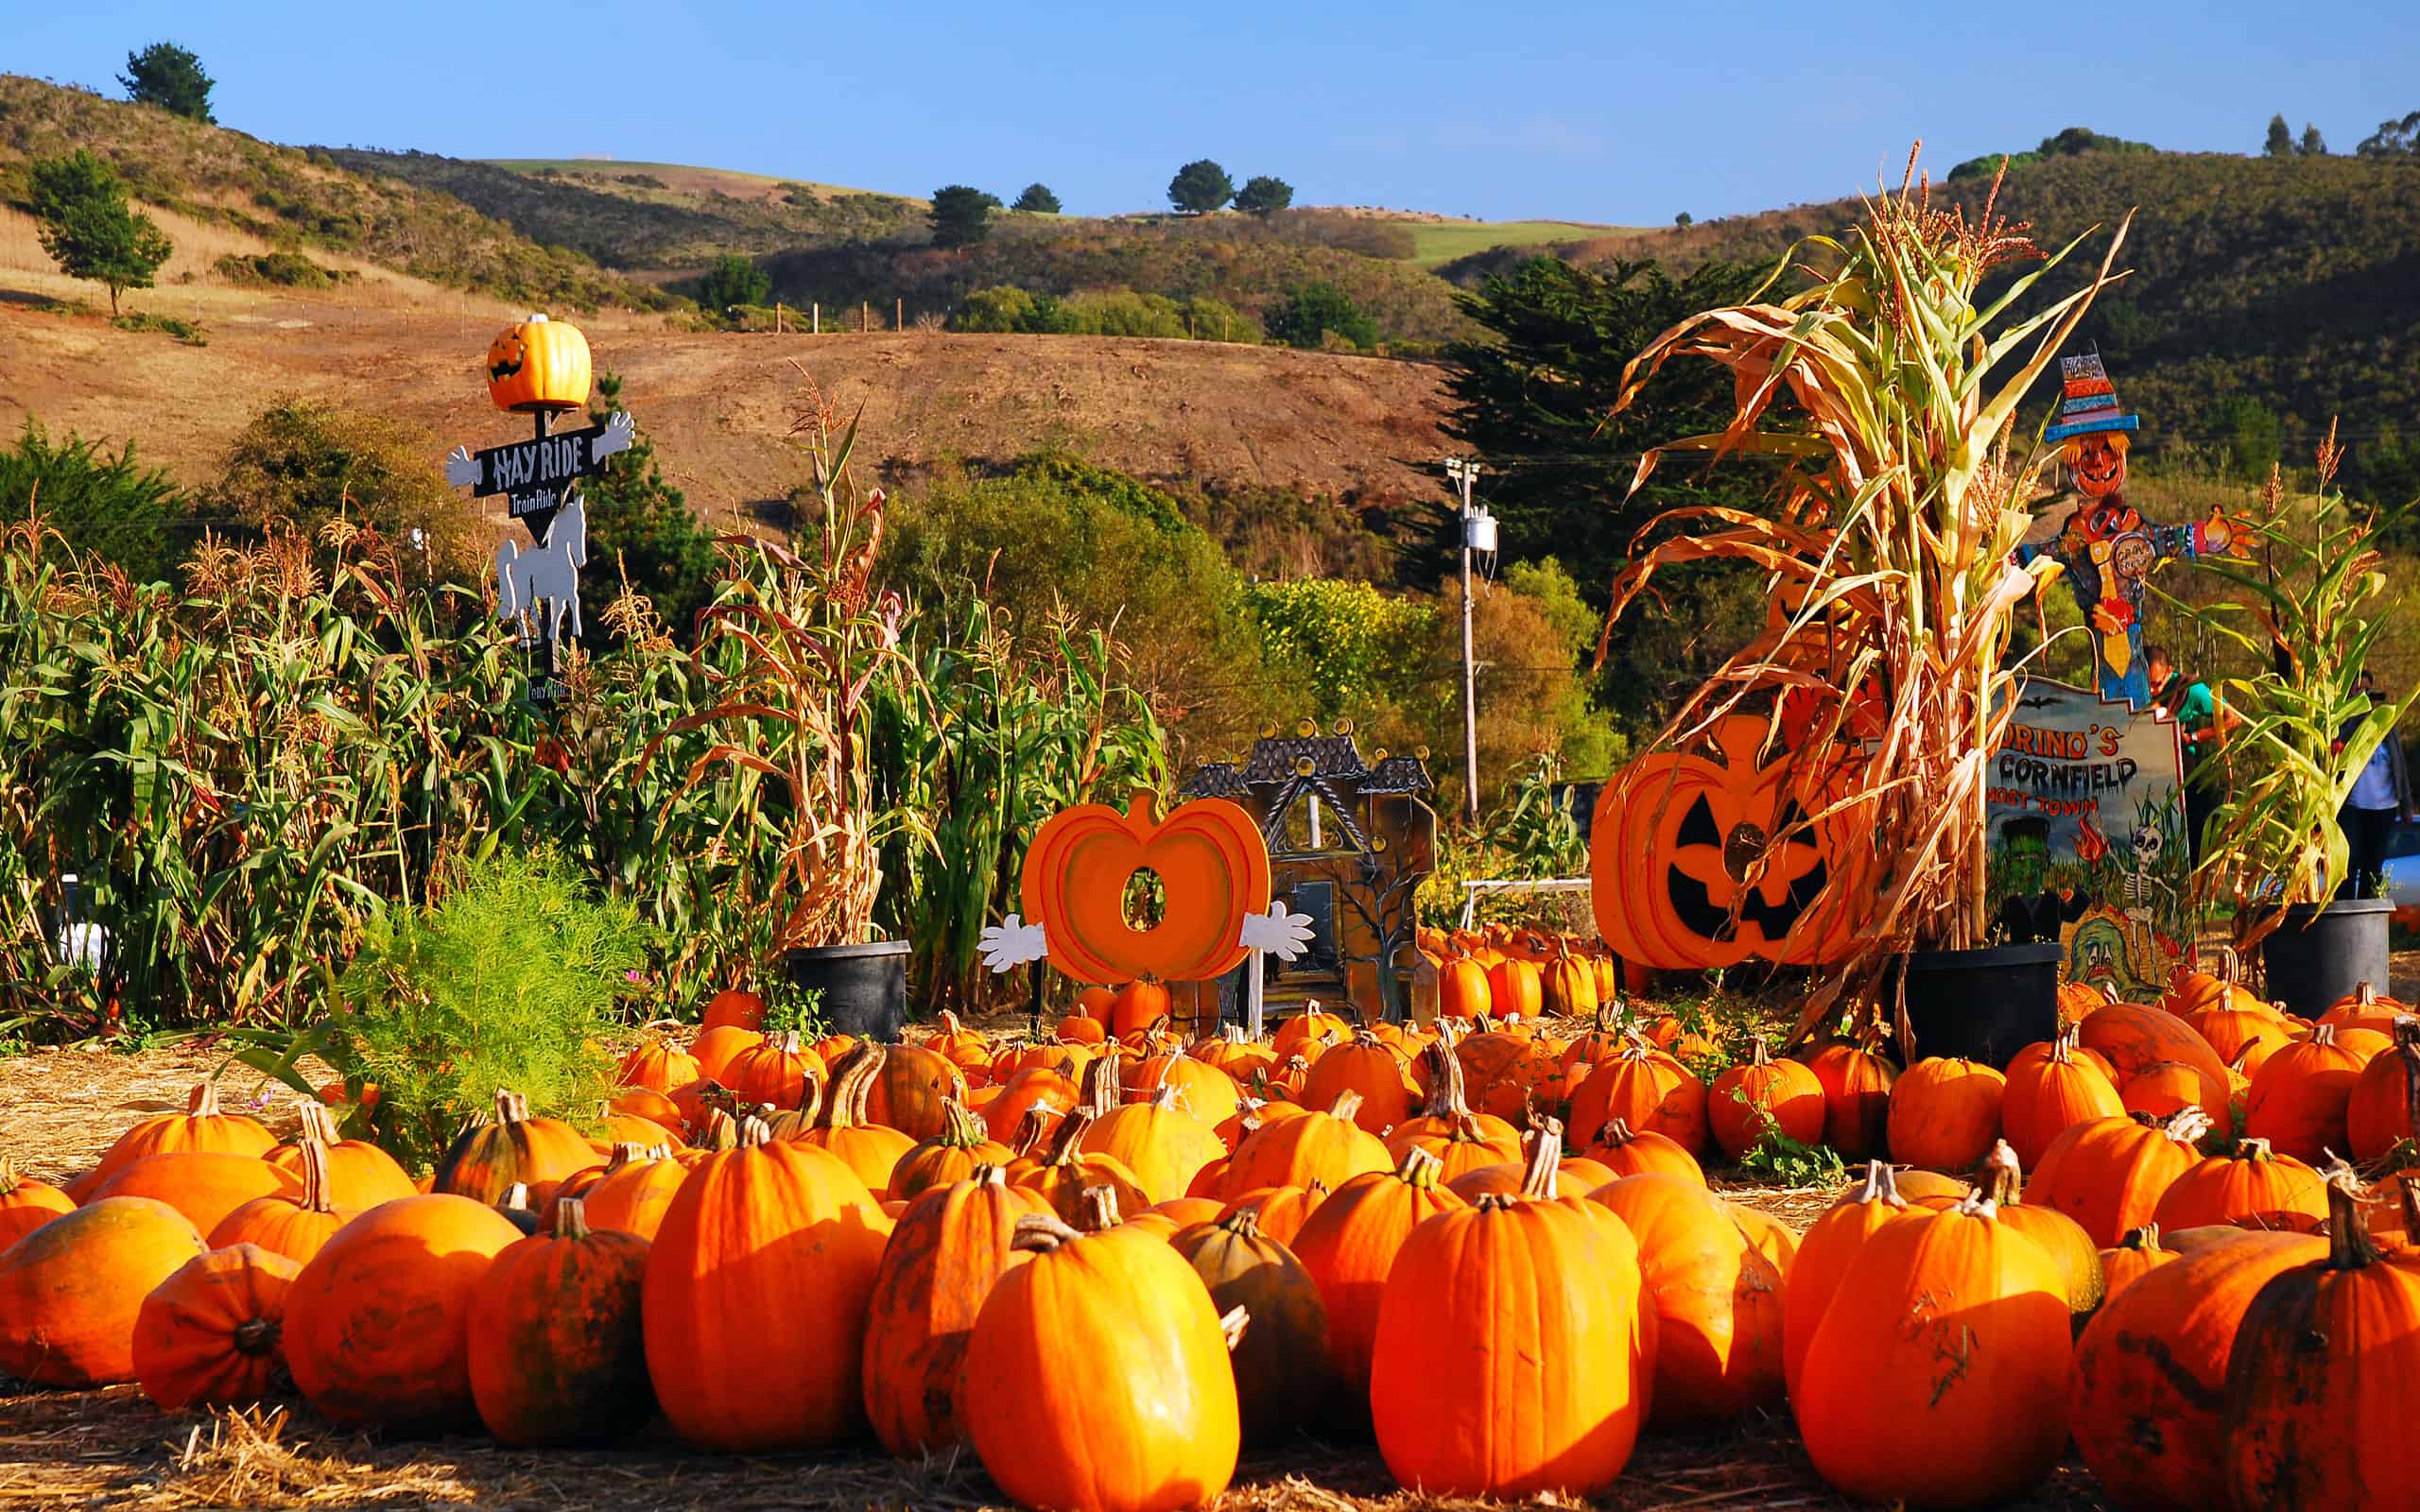 Pumpkin patch in the valley